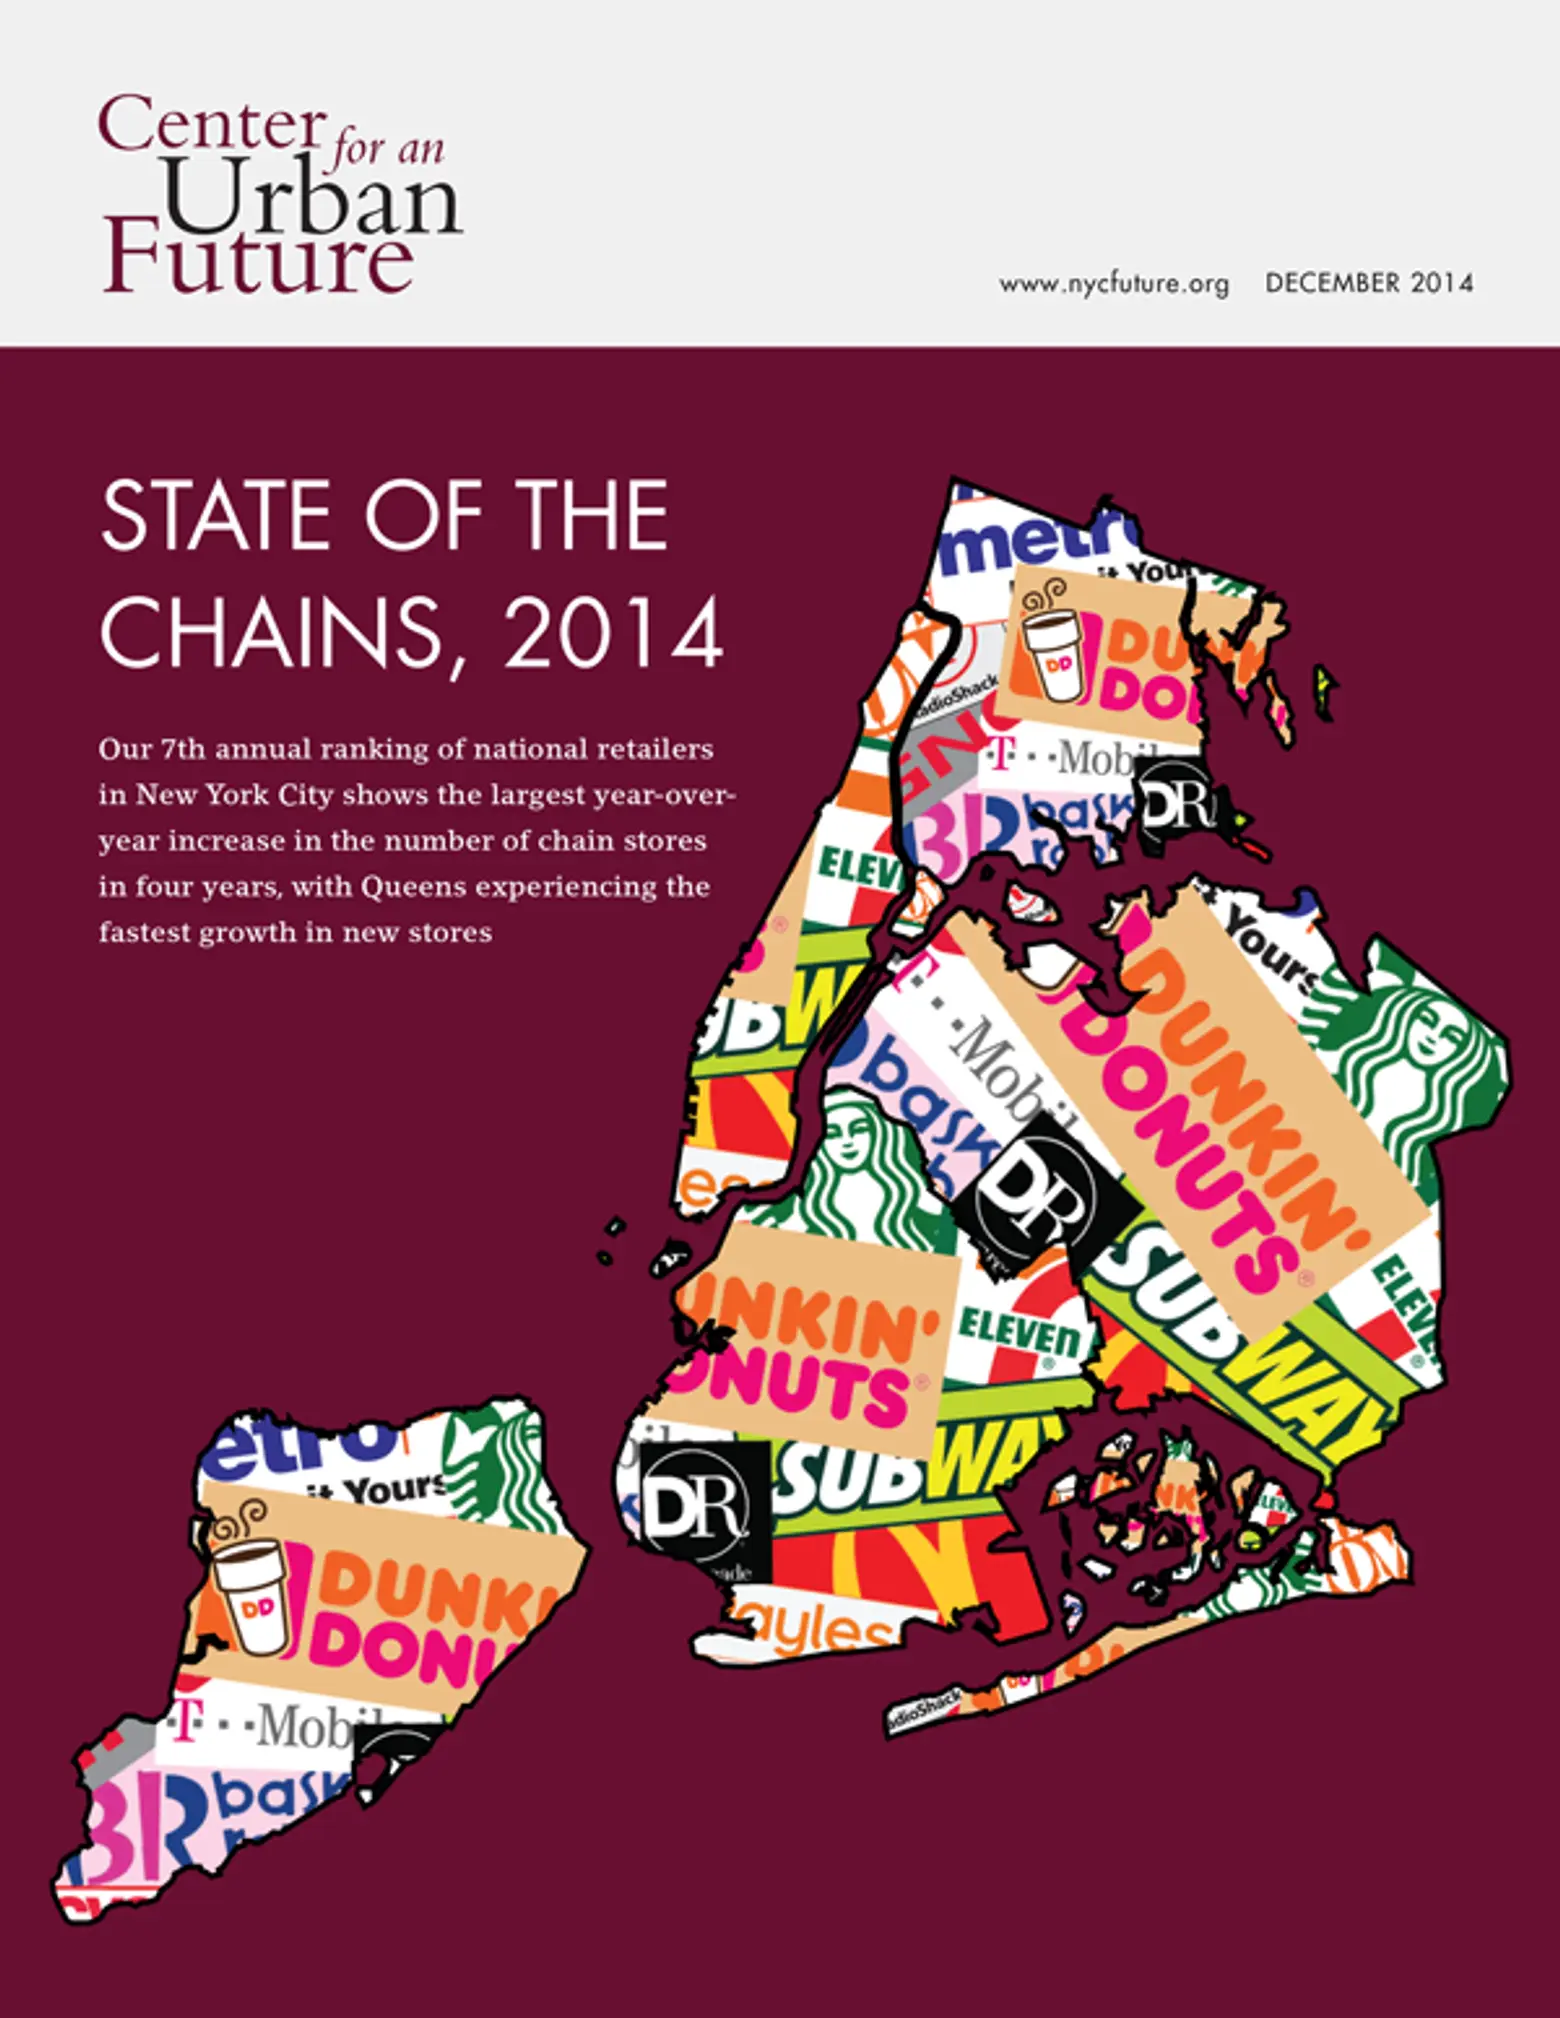 State of the Chains 2014, Center for an Urban Future, NYC chain stores